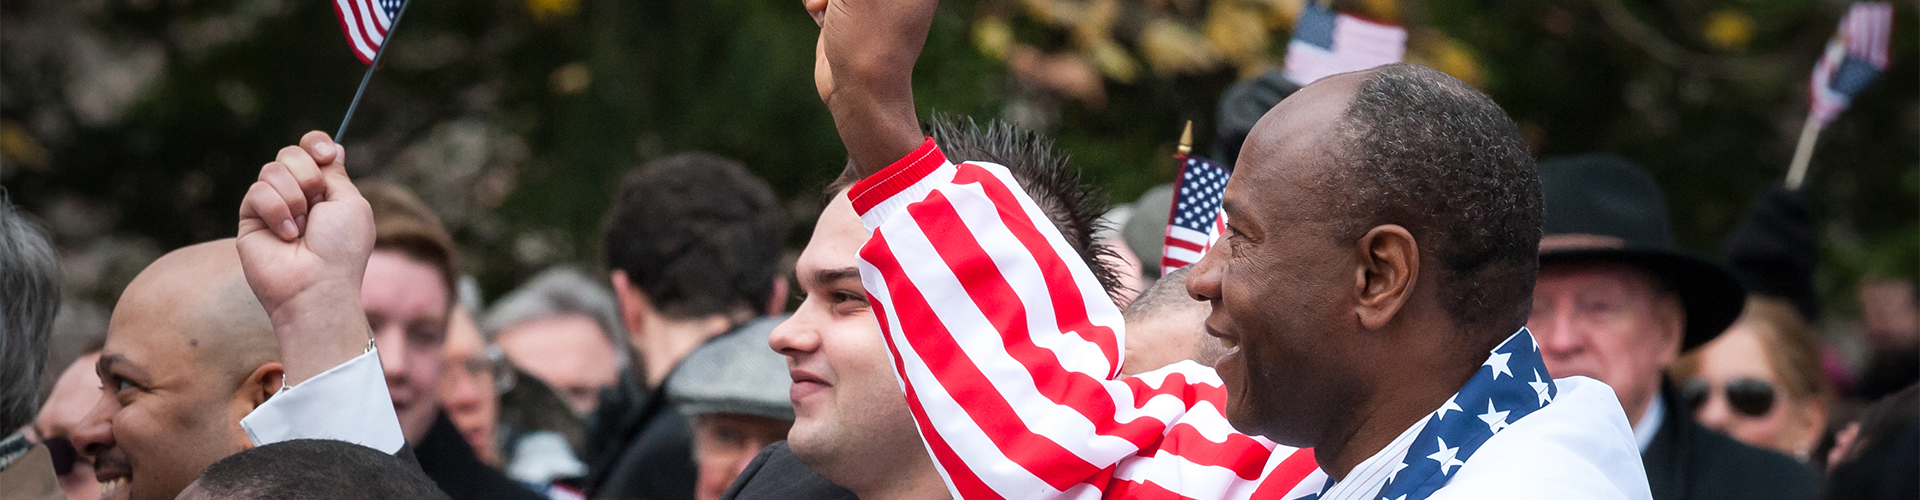 Newly naturalized immigrant citizens waving American flags at their Naturalization Oath Ceremony.